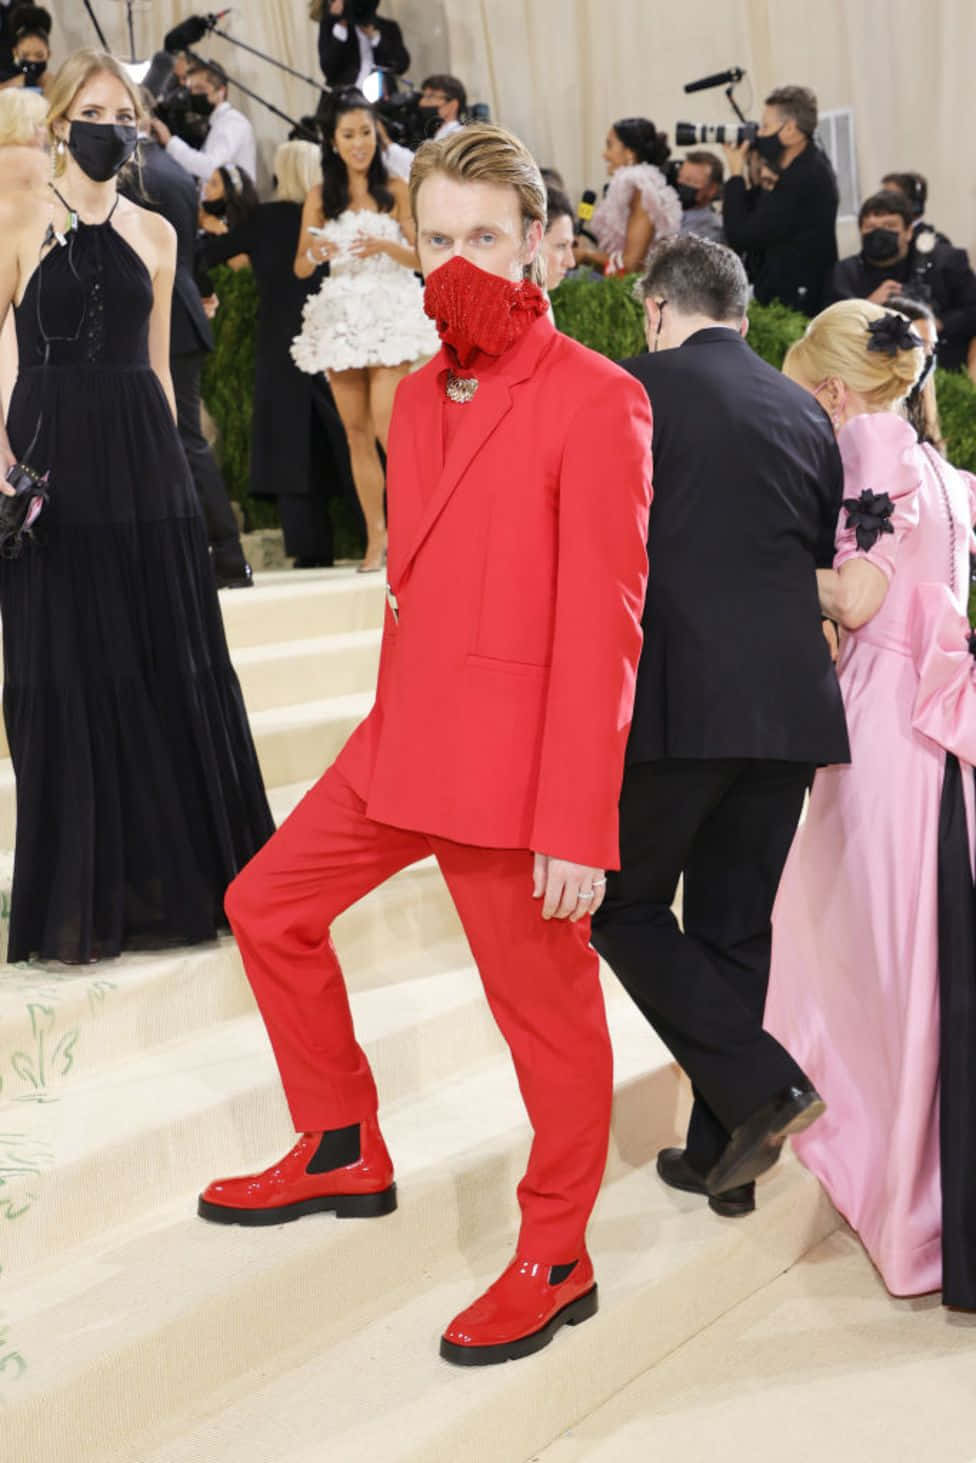 Celebrating fashion in style at the 2021 Met Gala!